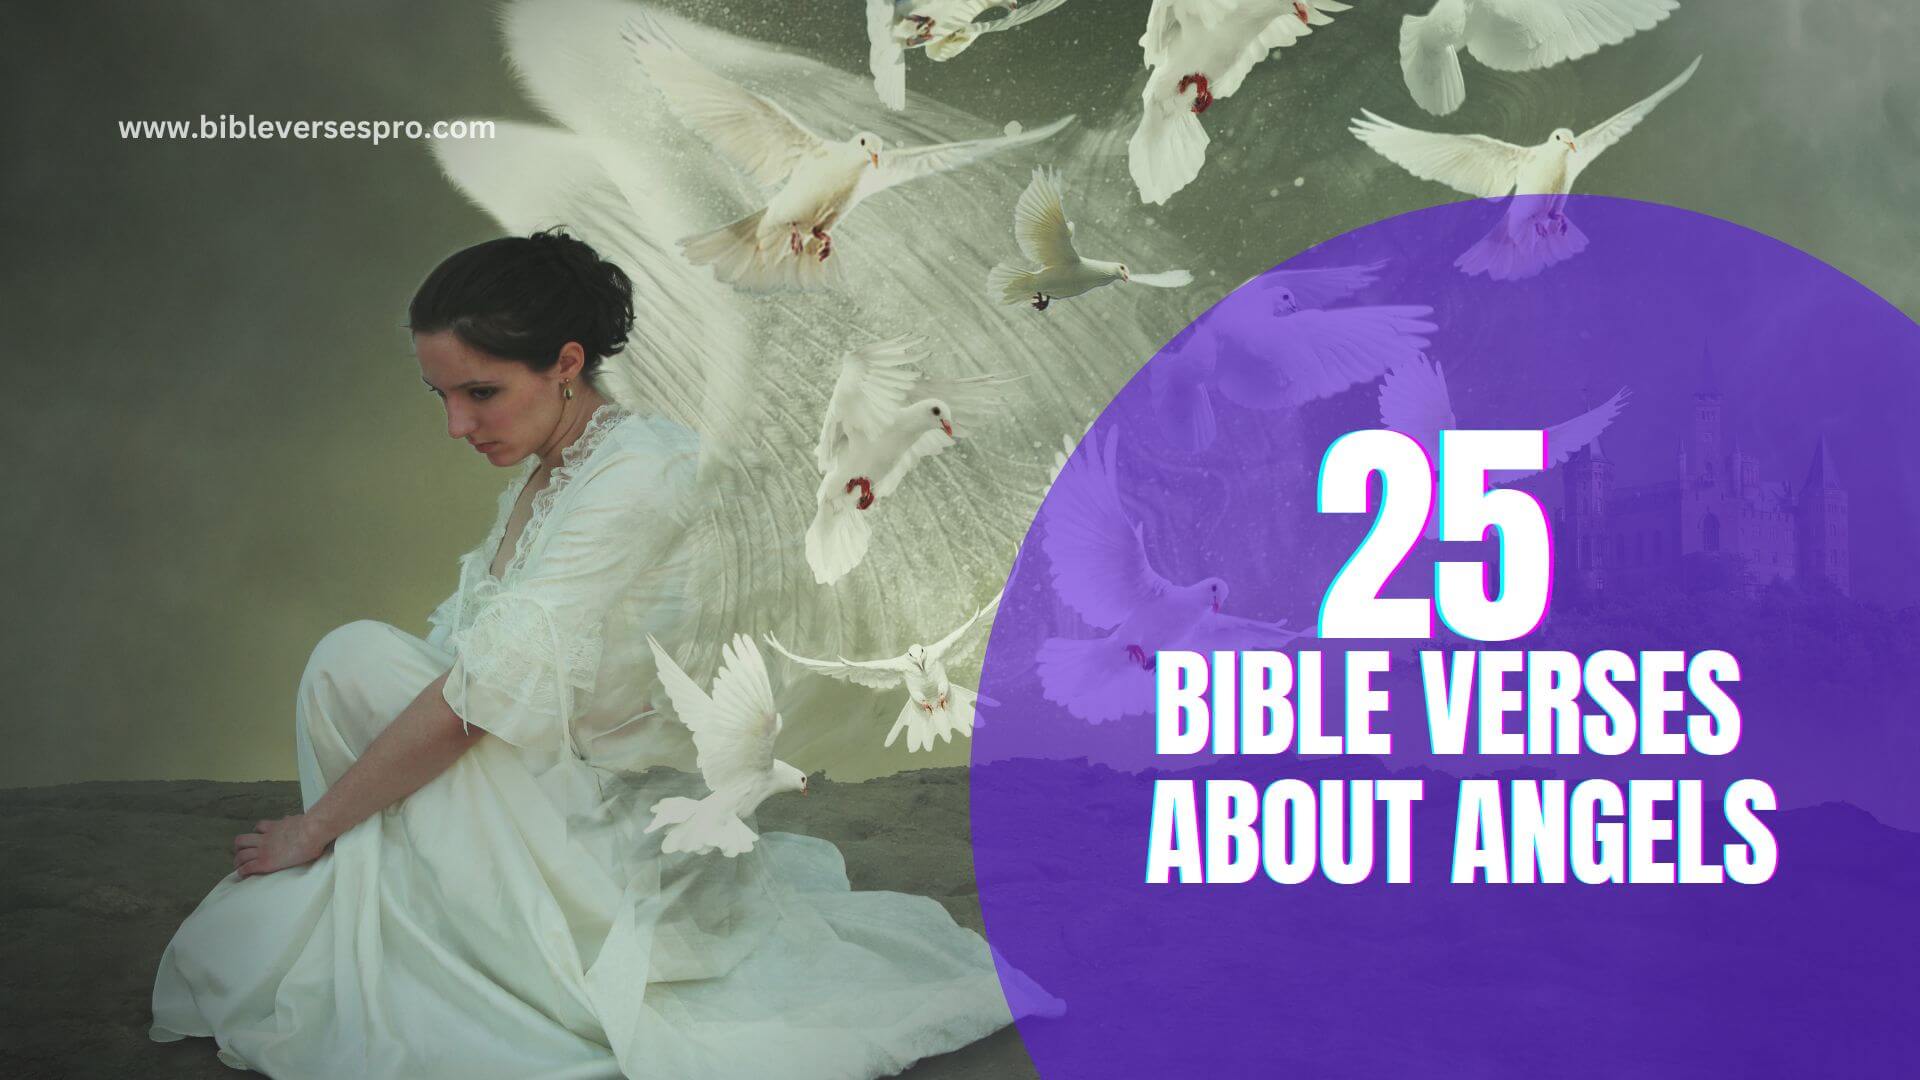 BIBLE VERSES ABOUT ANGELS